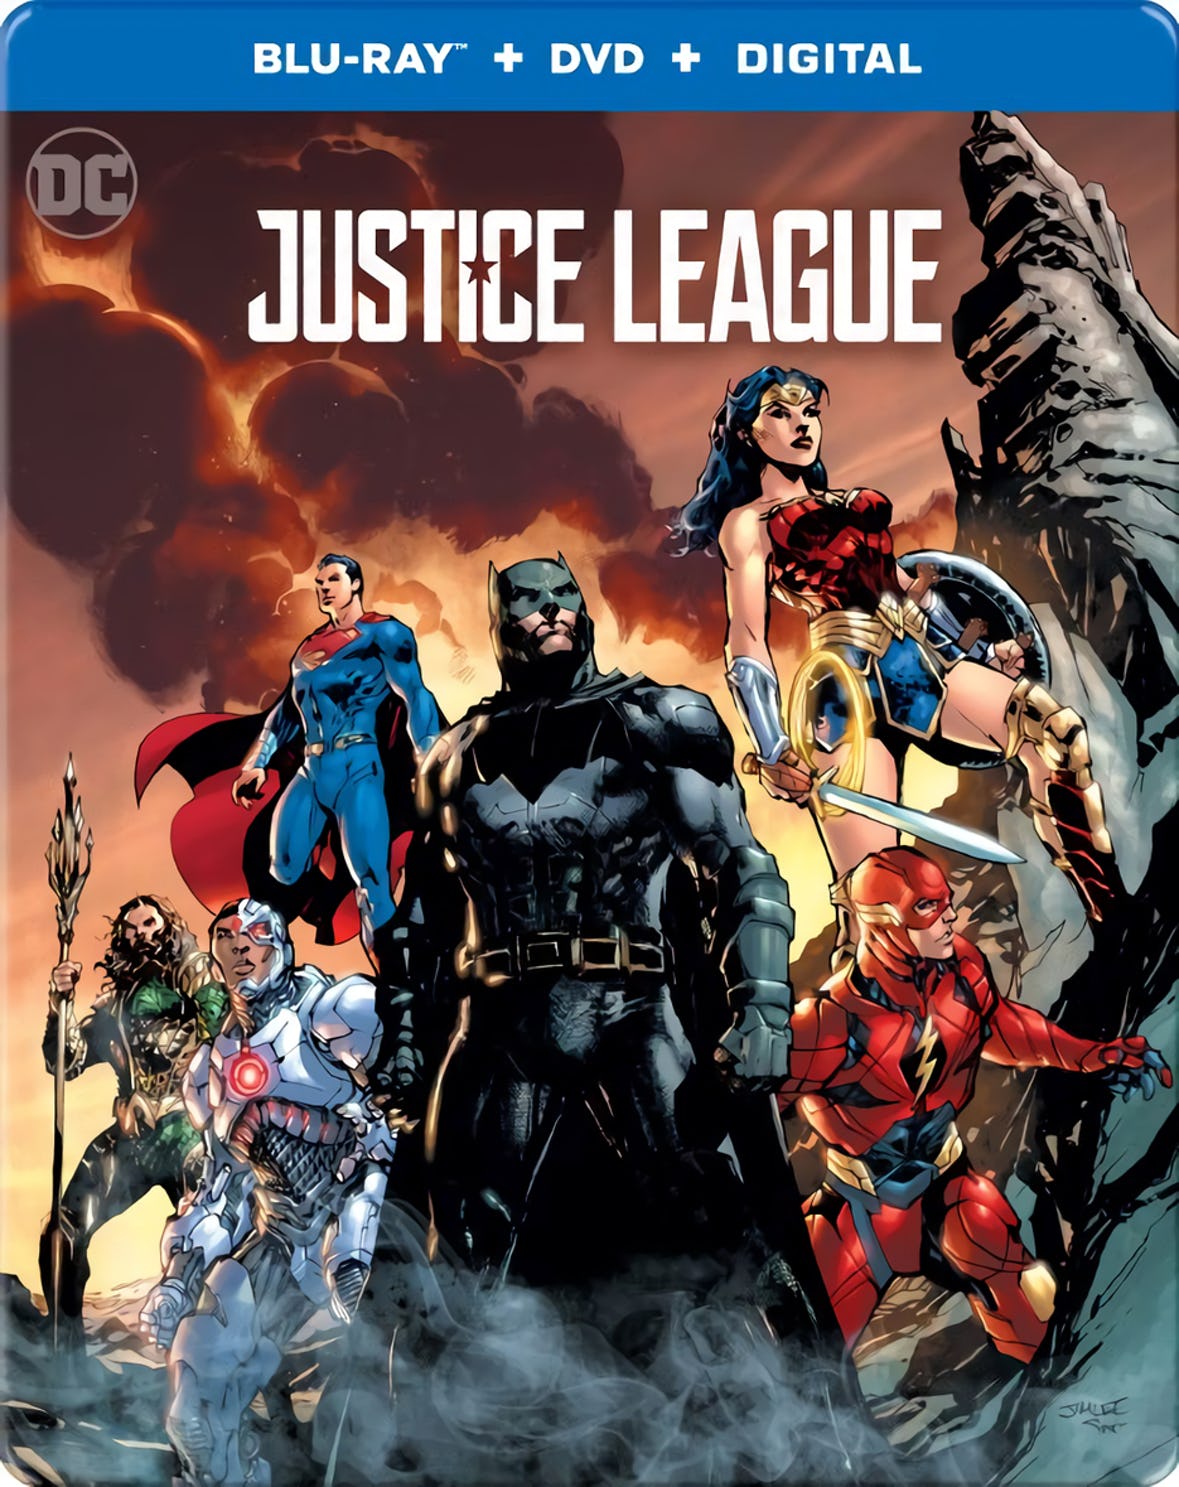 Justice League blu-ray